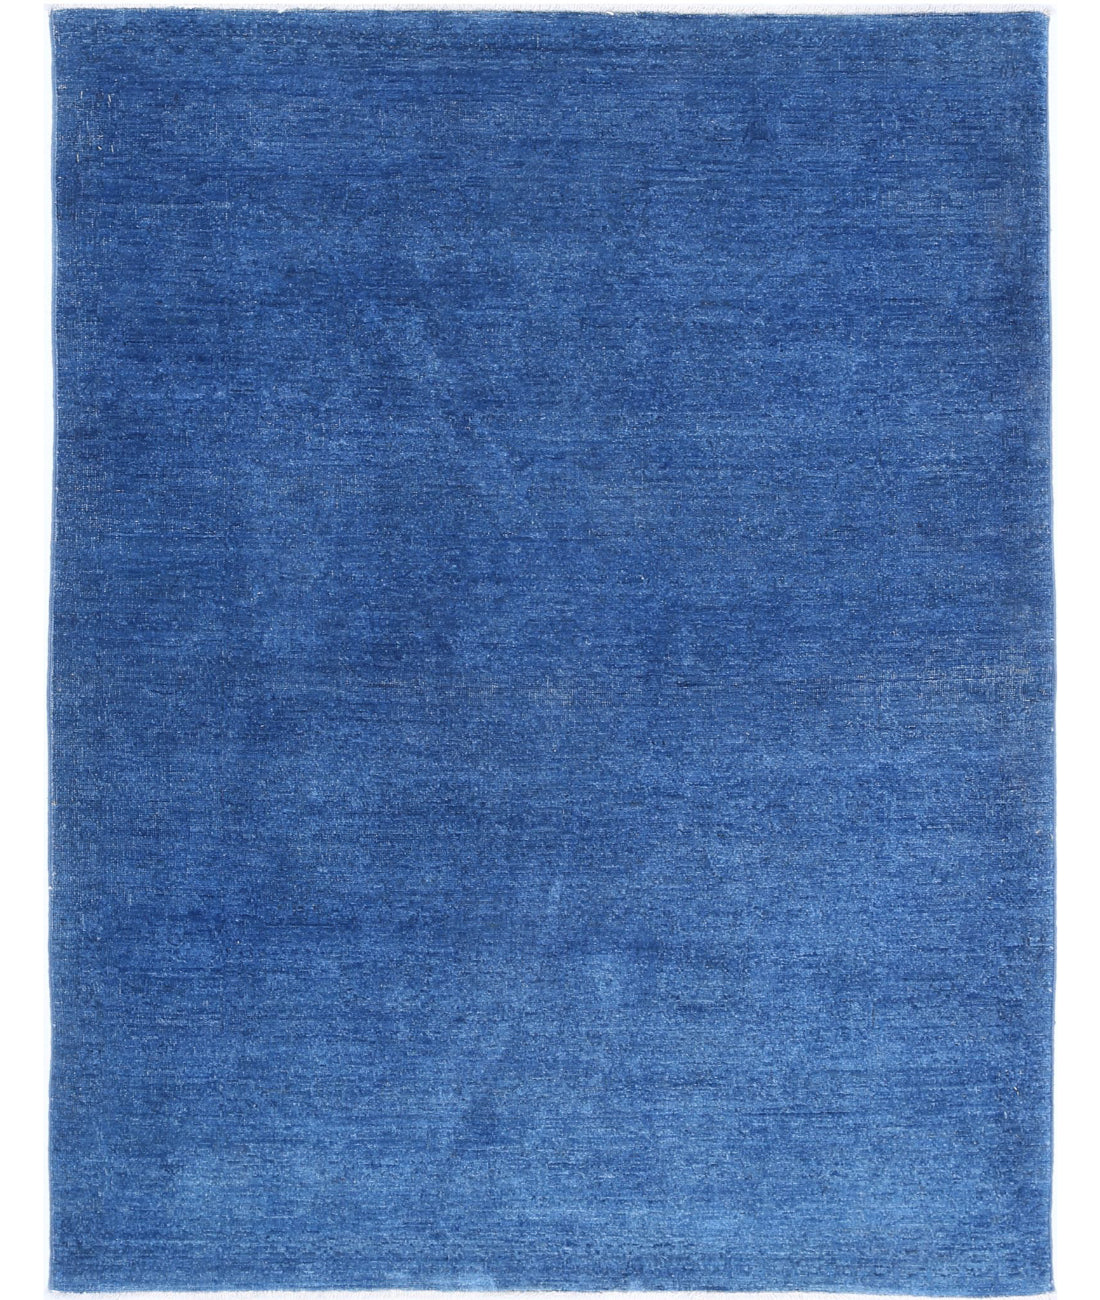 Hand Knotted Overdye Wool Rug - 3'11'' x 5'2'' 3'11'' x 5'2'' (118 X 155) / Blue / Blue